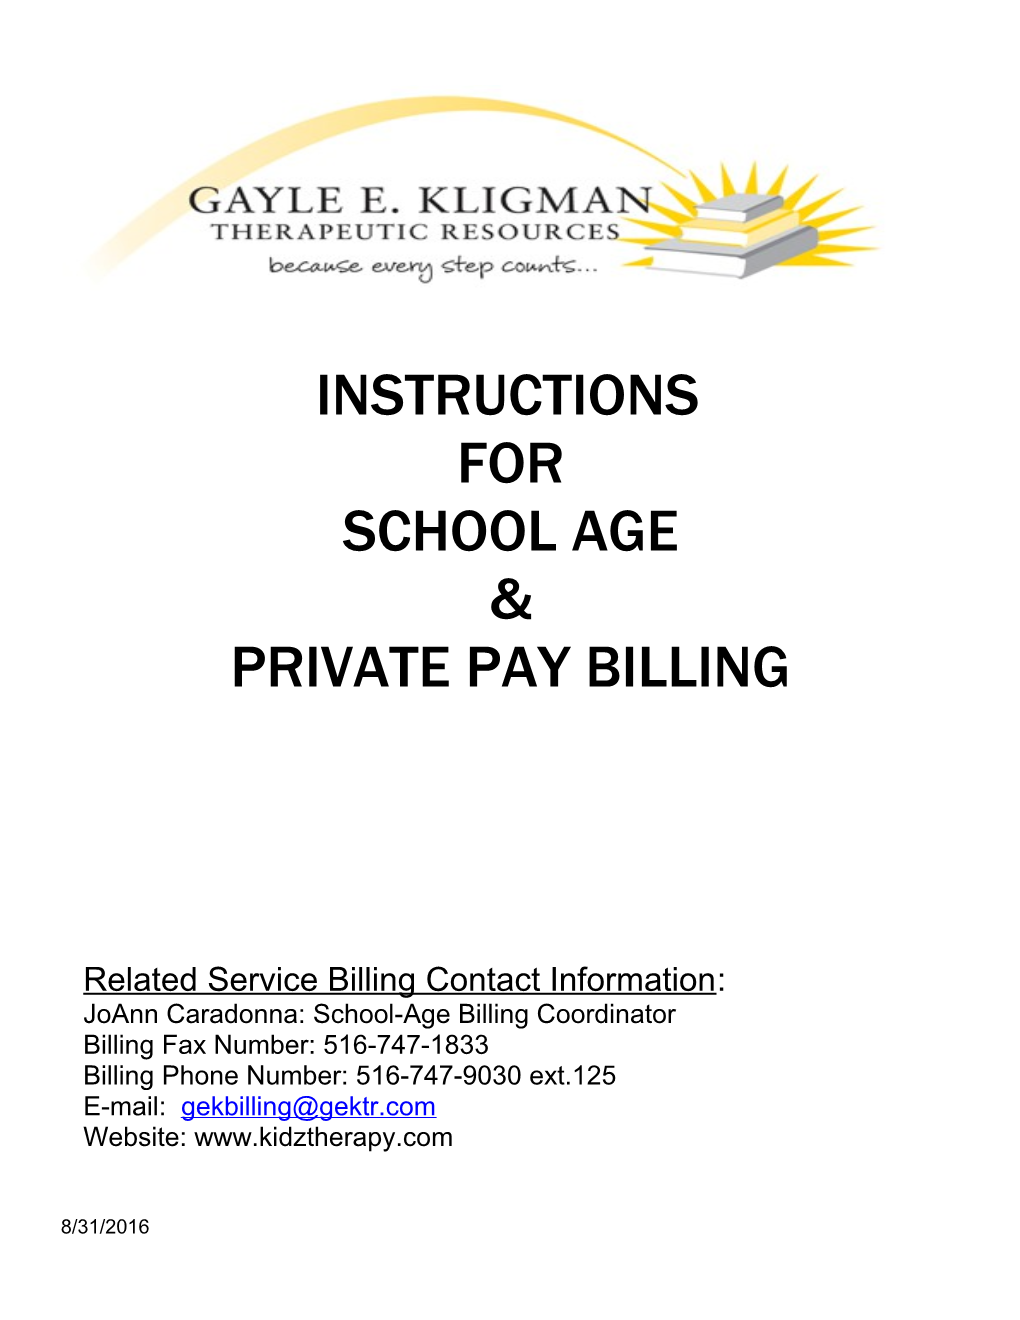 Related Service Billing Contact Information